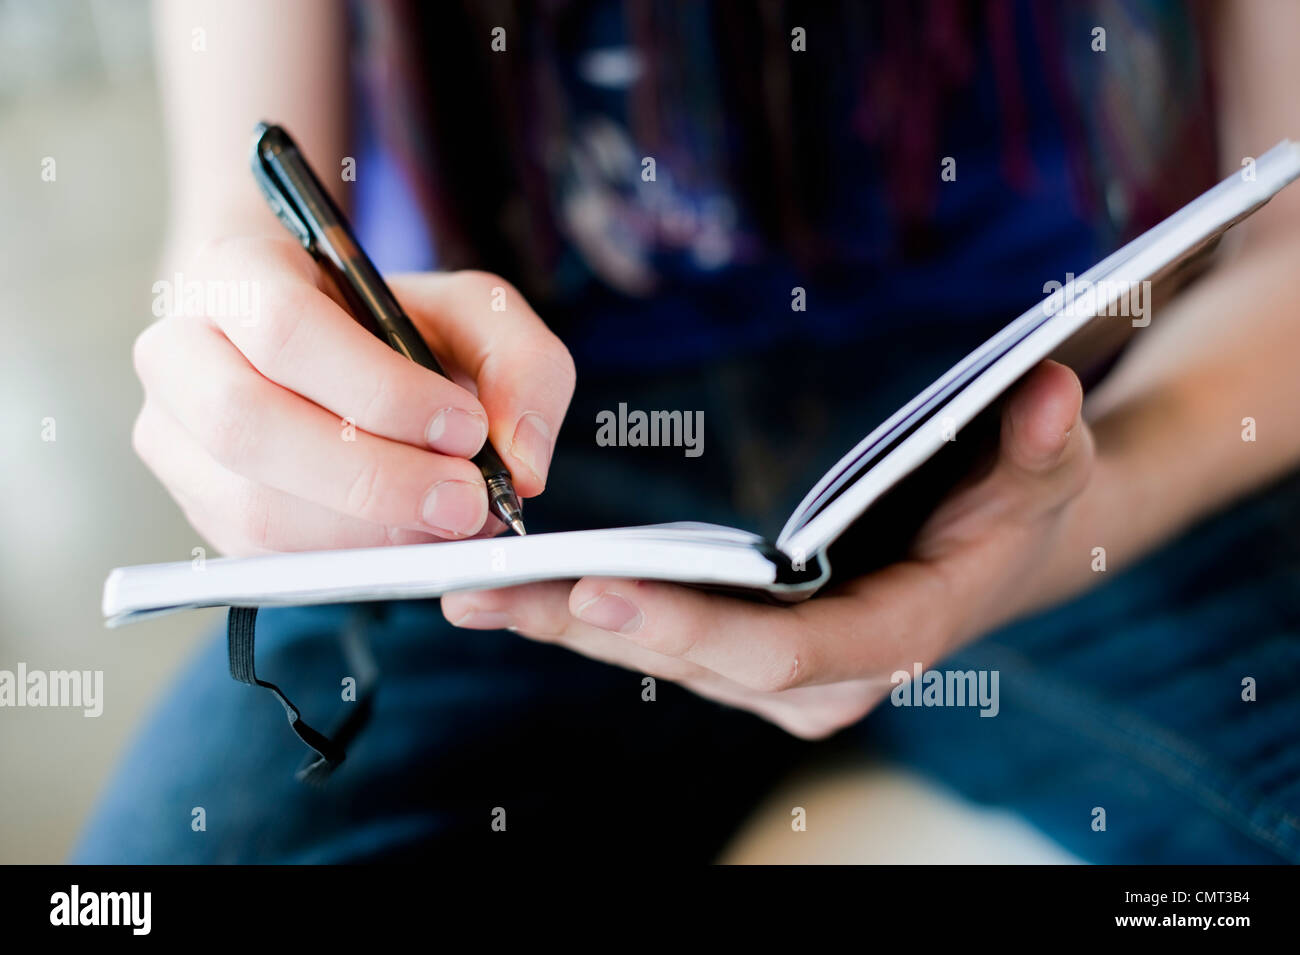 Young woman doing her school work Stock Photo